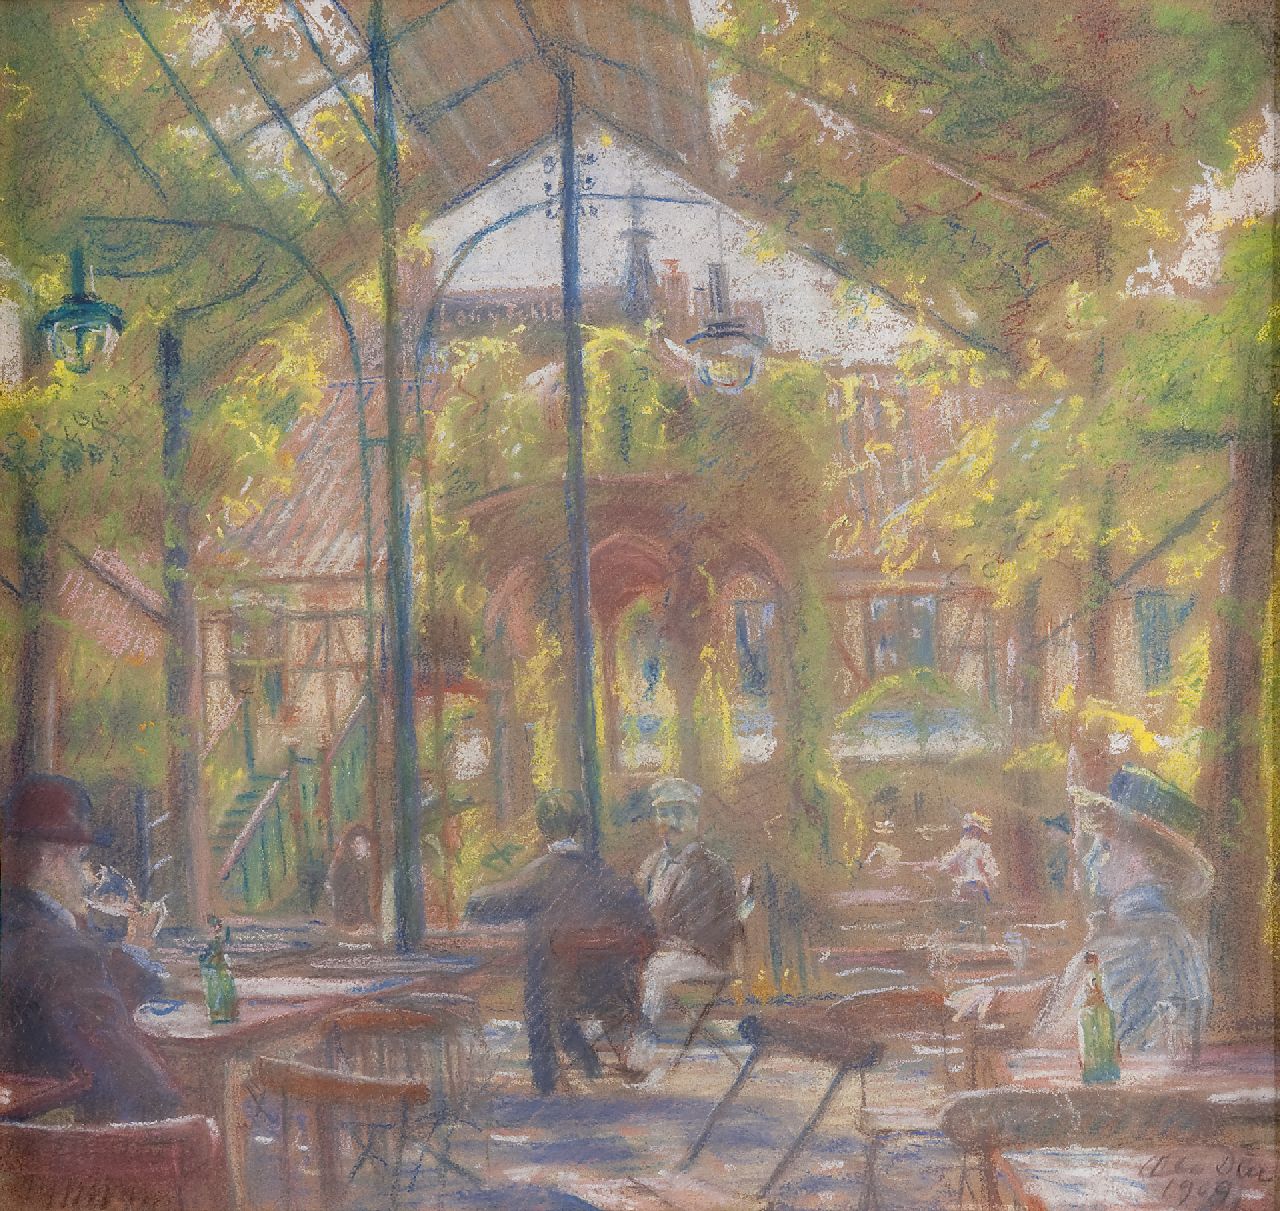 Due O.W.S.  | Ole Wolhardt Stampe Due | Watercolours and drawings offered for sale | Garden café in Copenhagen, pastel on paper 49.3 x 55.0 cm, signed l.r. and dated 1909